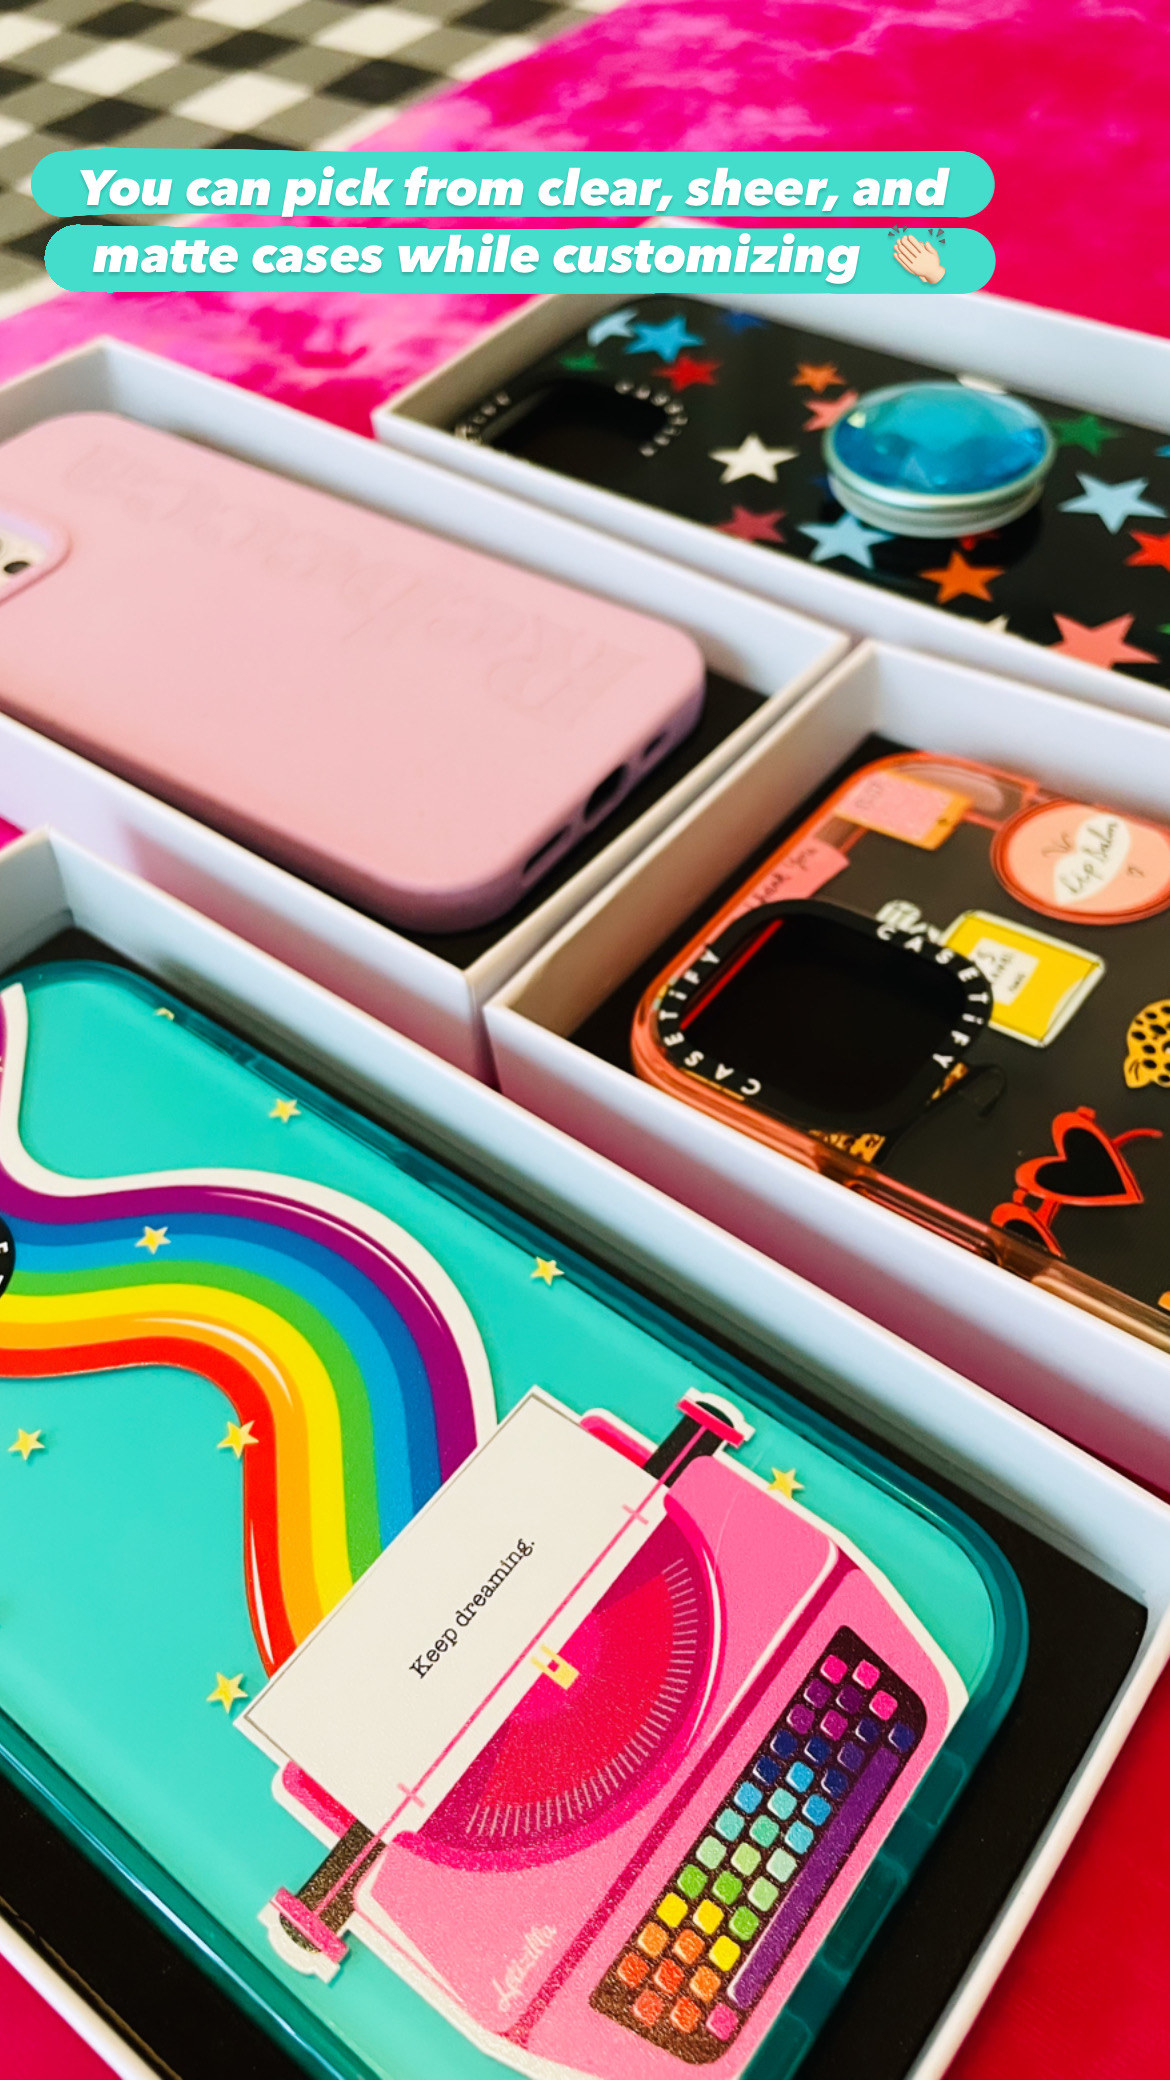 BTS x Casetify: 7 Tech Accessories We're Obsessed With